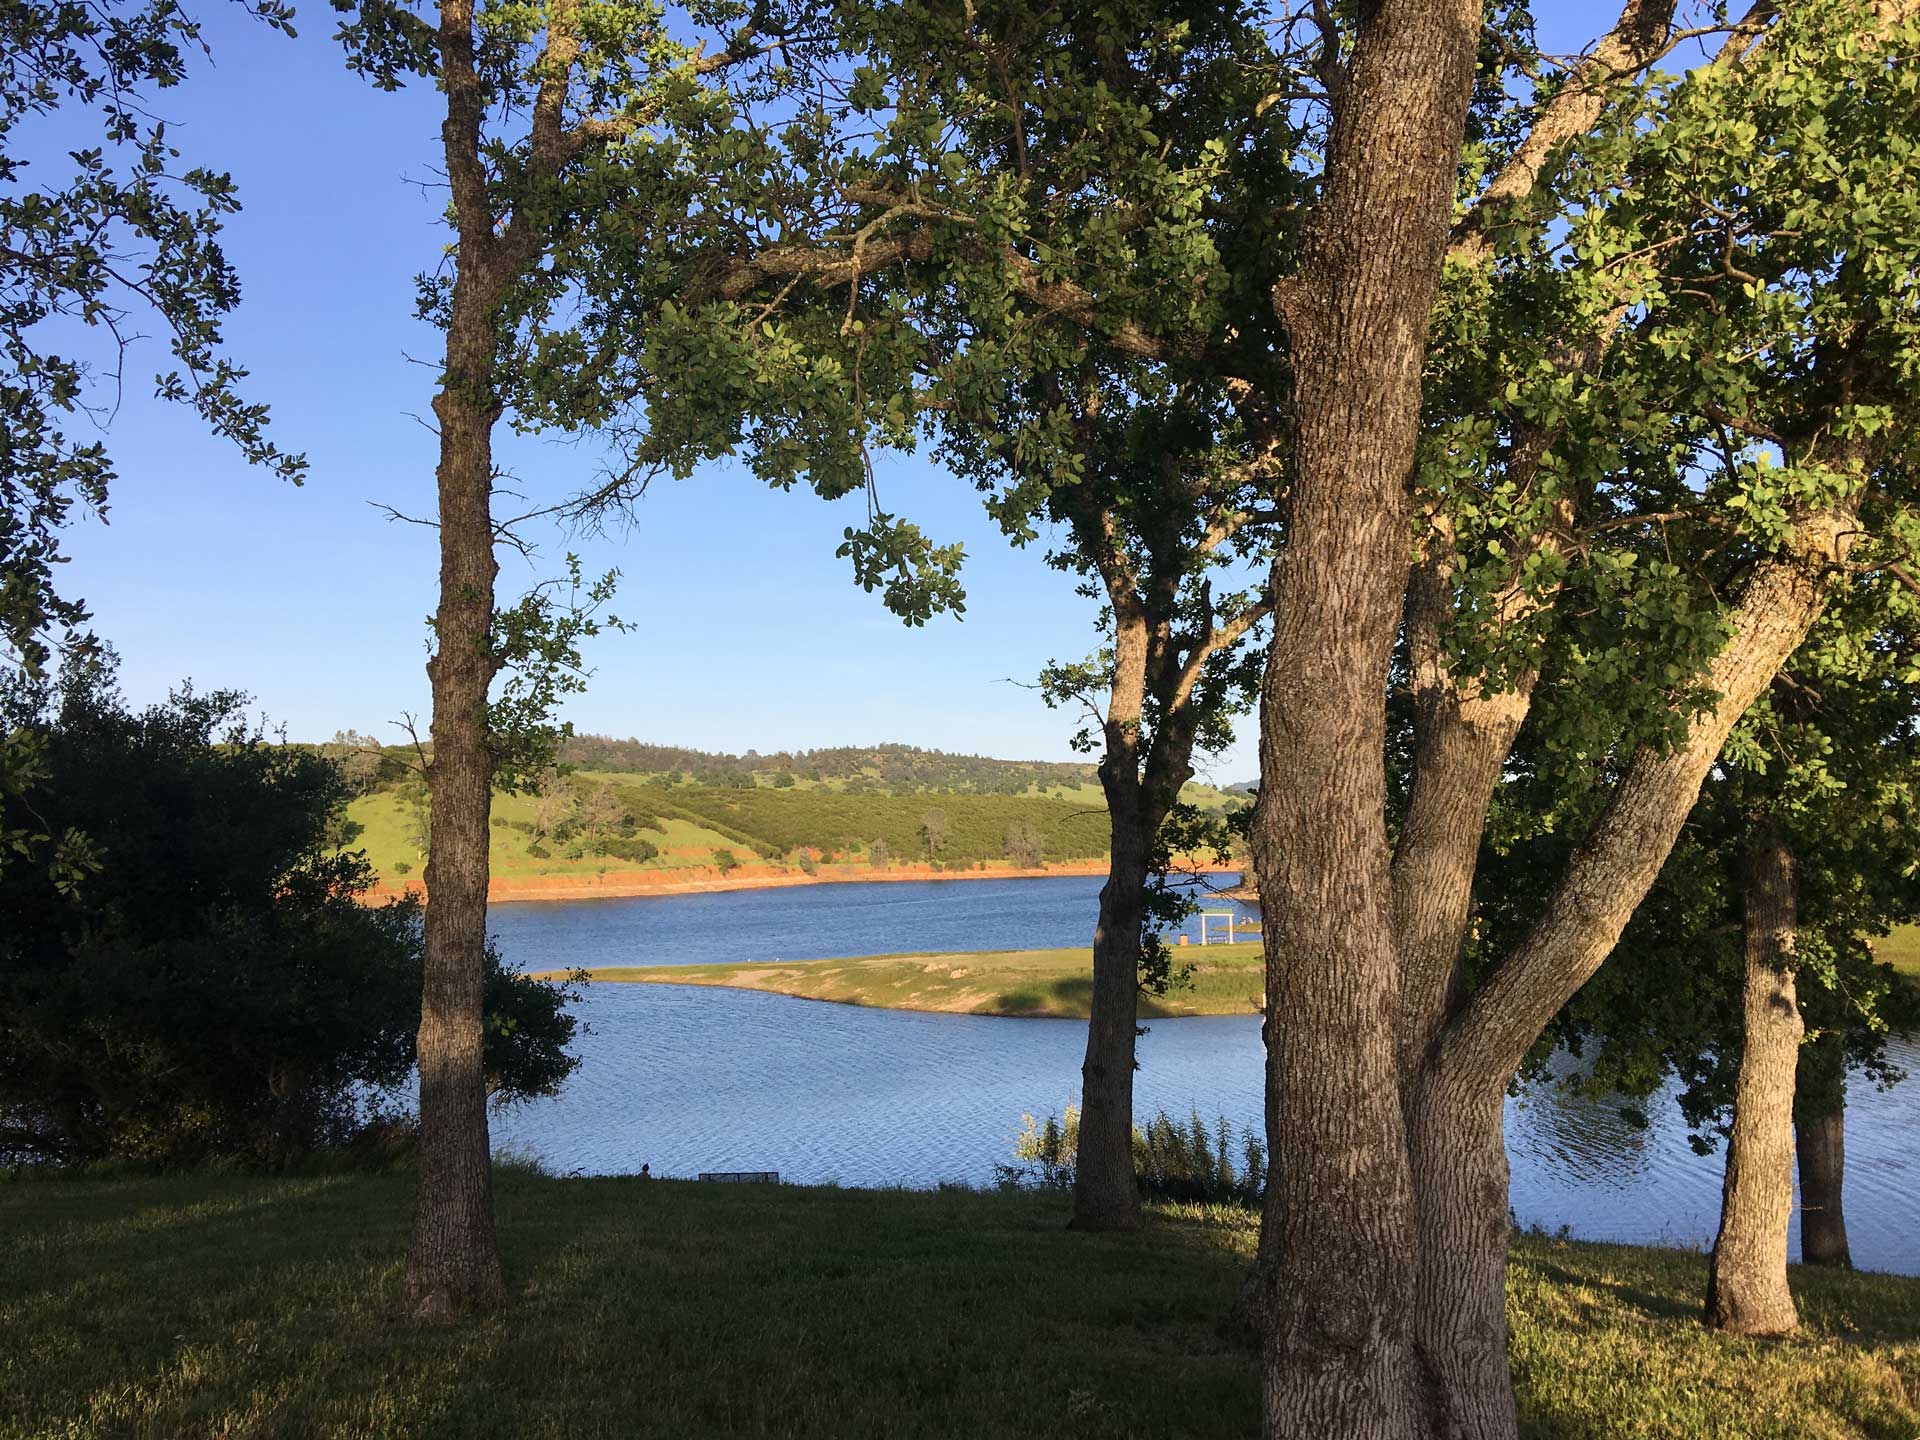 Pardee Reservoir offers fishing, boating, camping for seniors and families